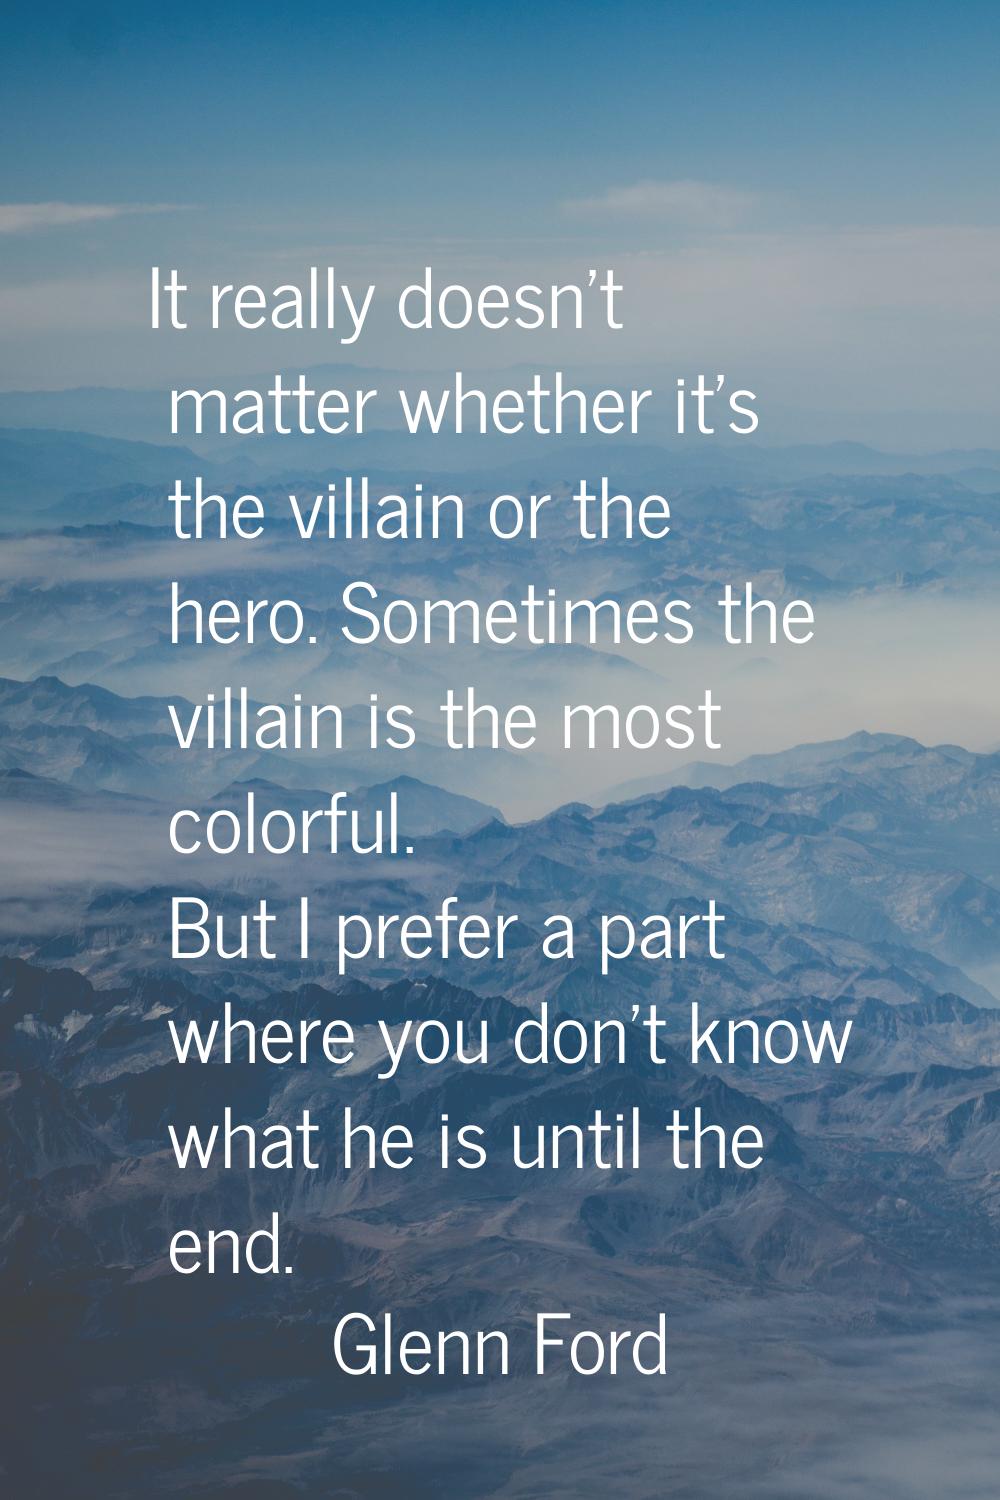 It really doesn't matter whether it's the villain or the hero. Sometimes the villain is the most co